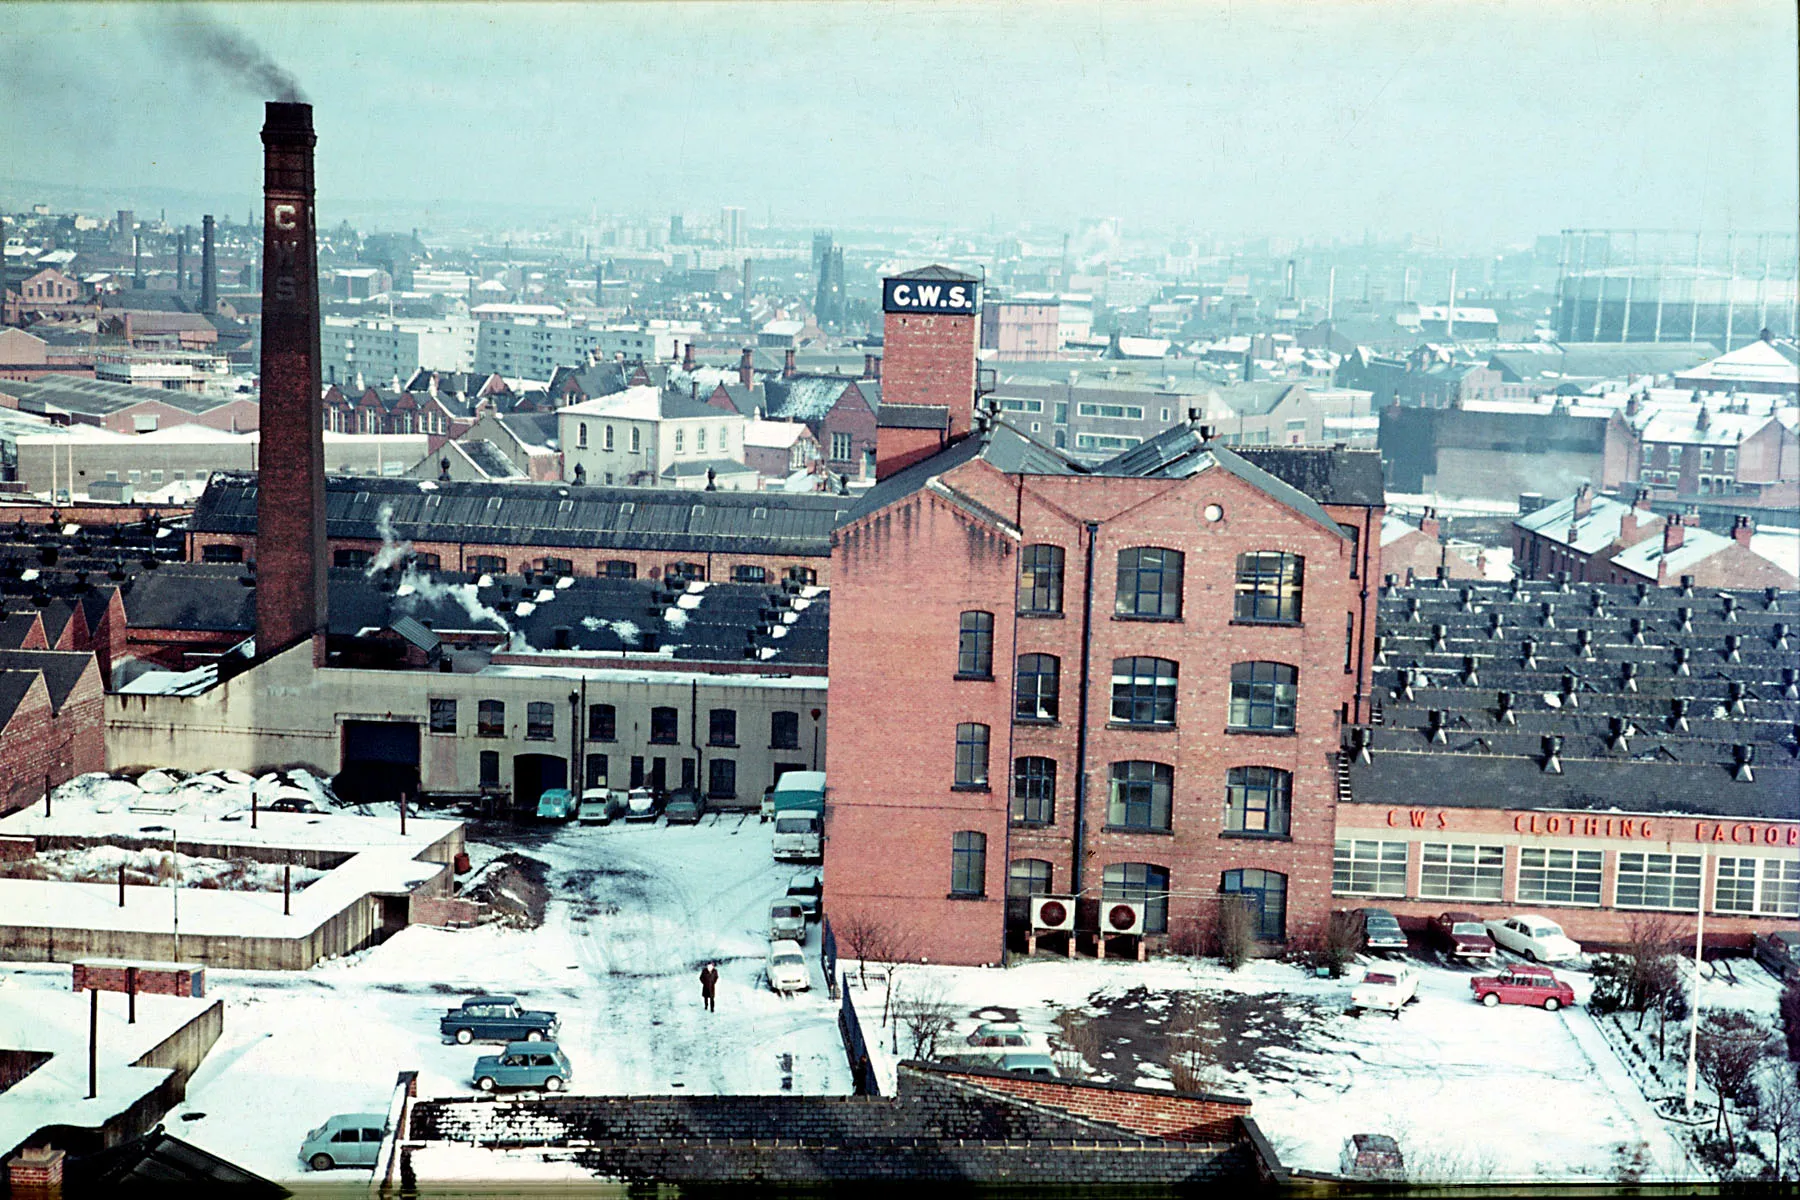 Photo showing: Take 2 of an earlier scan. The CWS Menswear Clothing Factory at The Mint, Holbeck, Leeds as it was around 1966. Taken from the new flats and showing some of the Leeds skyline in the background.